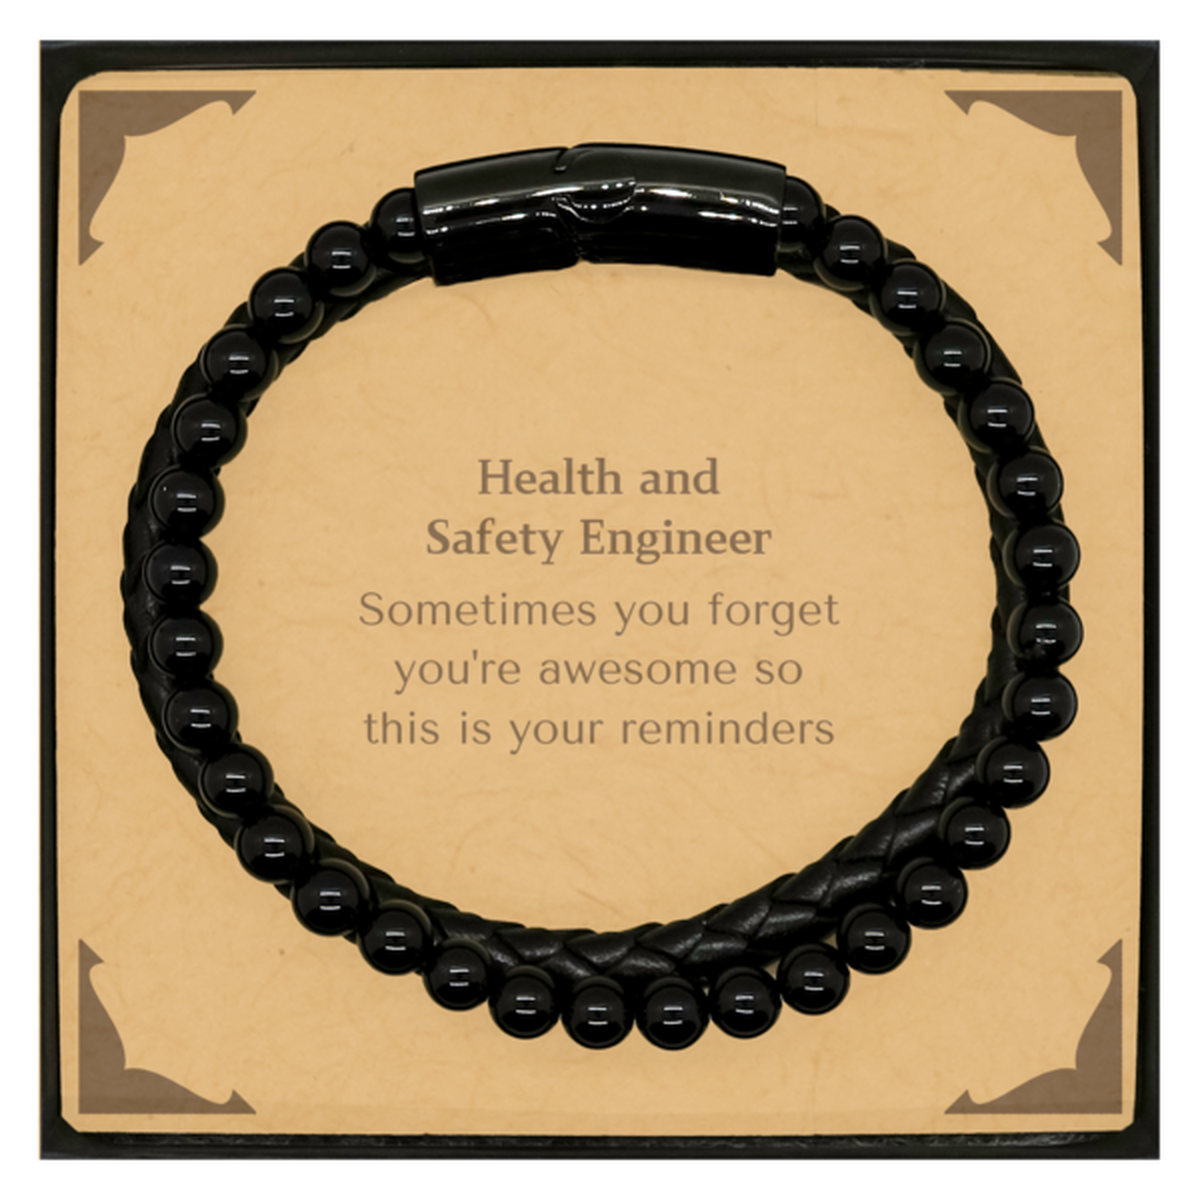 Sentimental Health and Safety Engineer Stone Leather Bracelets, Health and Safety Engineer Sometimes you forget you're awesome so this is your reminders, Graduation Christmas Birthday Gifts for Health and Safety Engineer, Men, Women, Coworkers